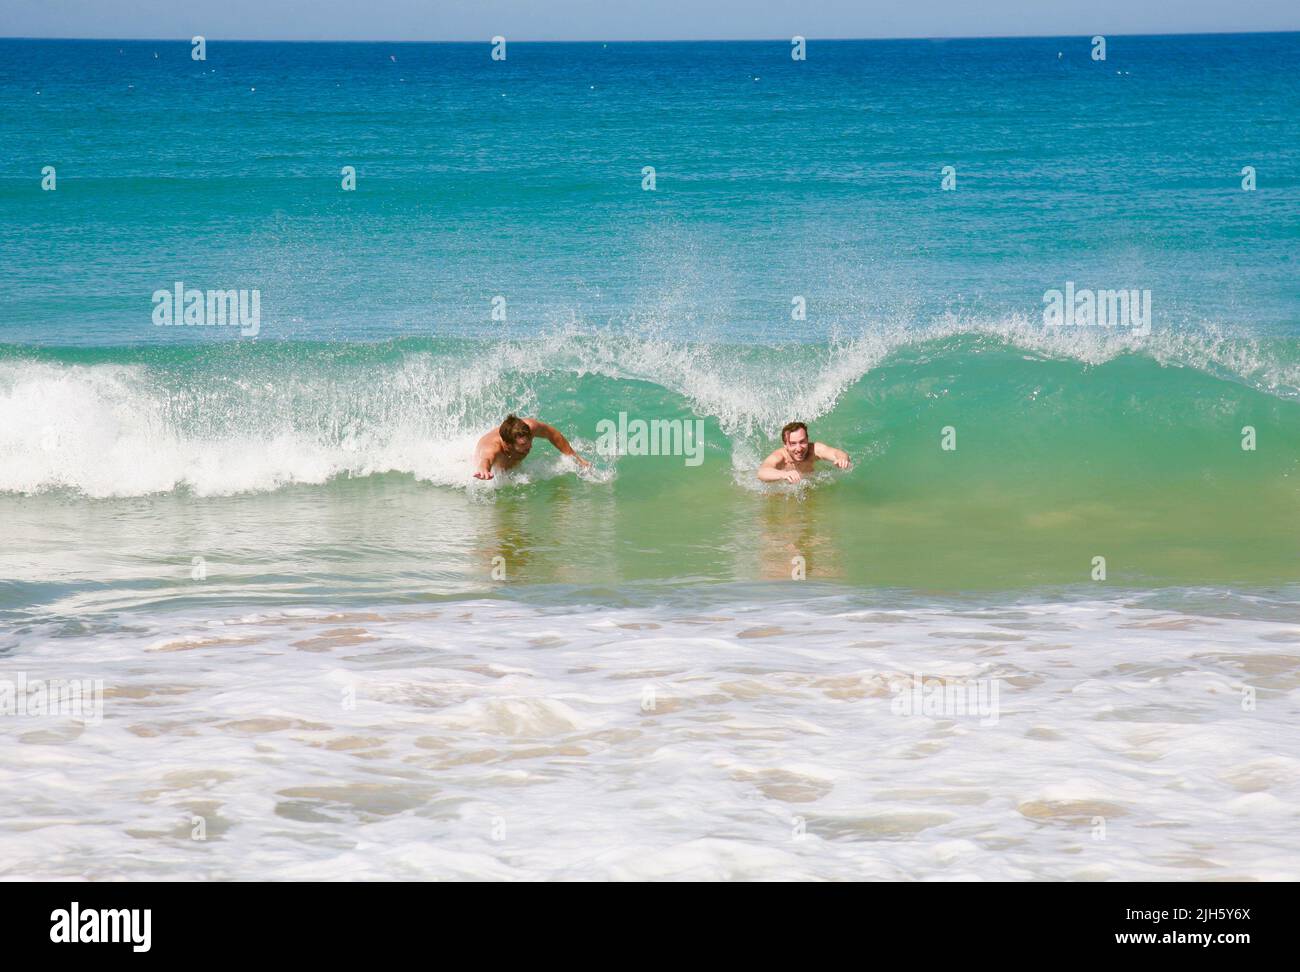 Crashing through the surf at Surtainville, Normandy, France, Europe Stock Photo